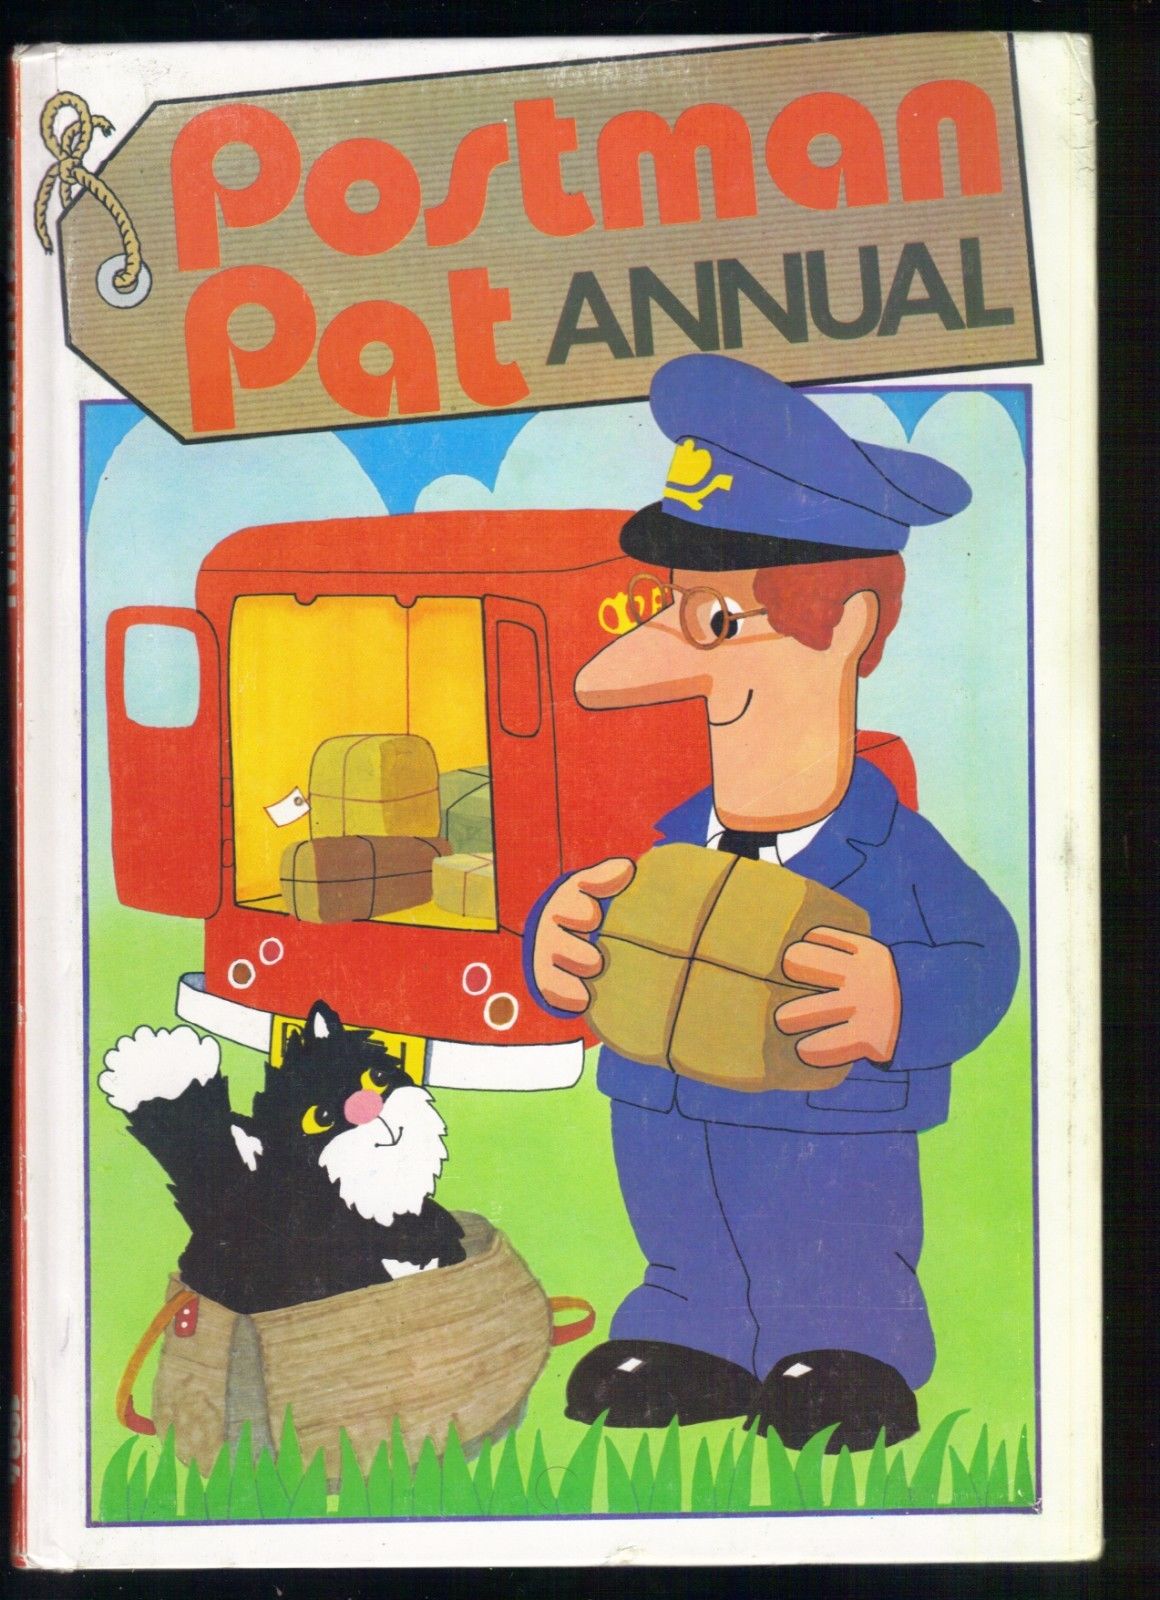 postman download collection